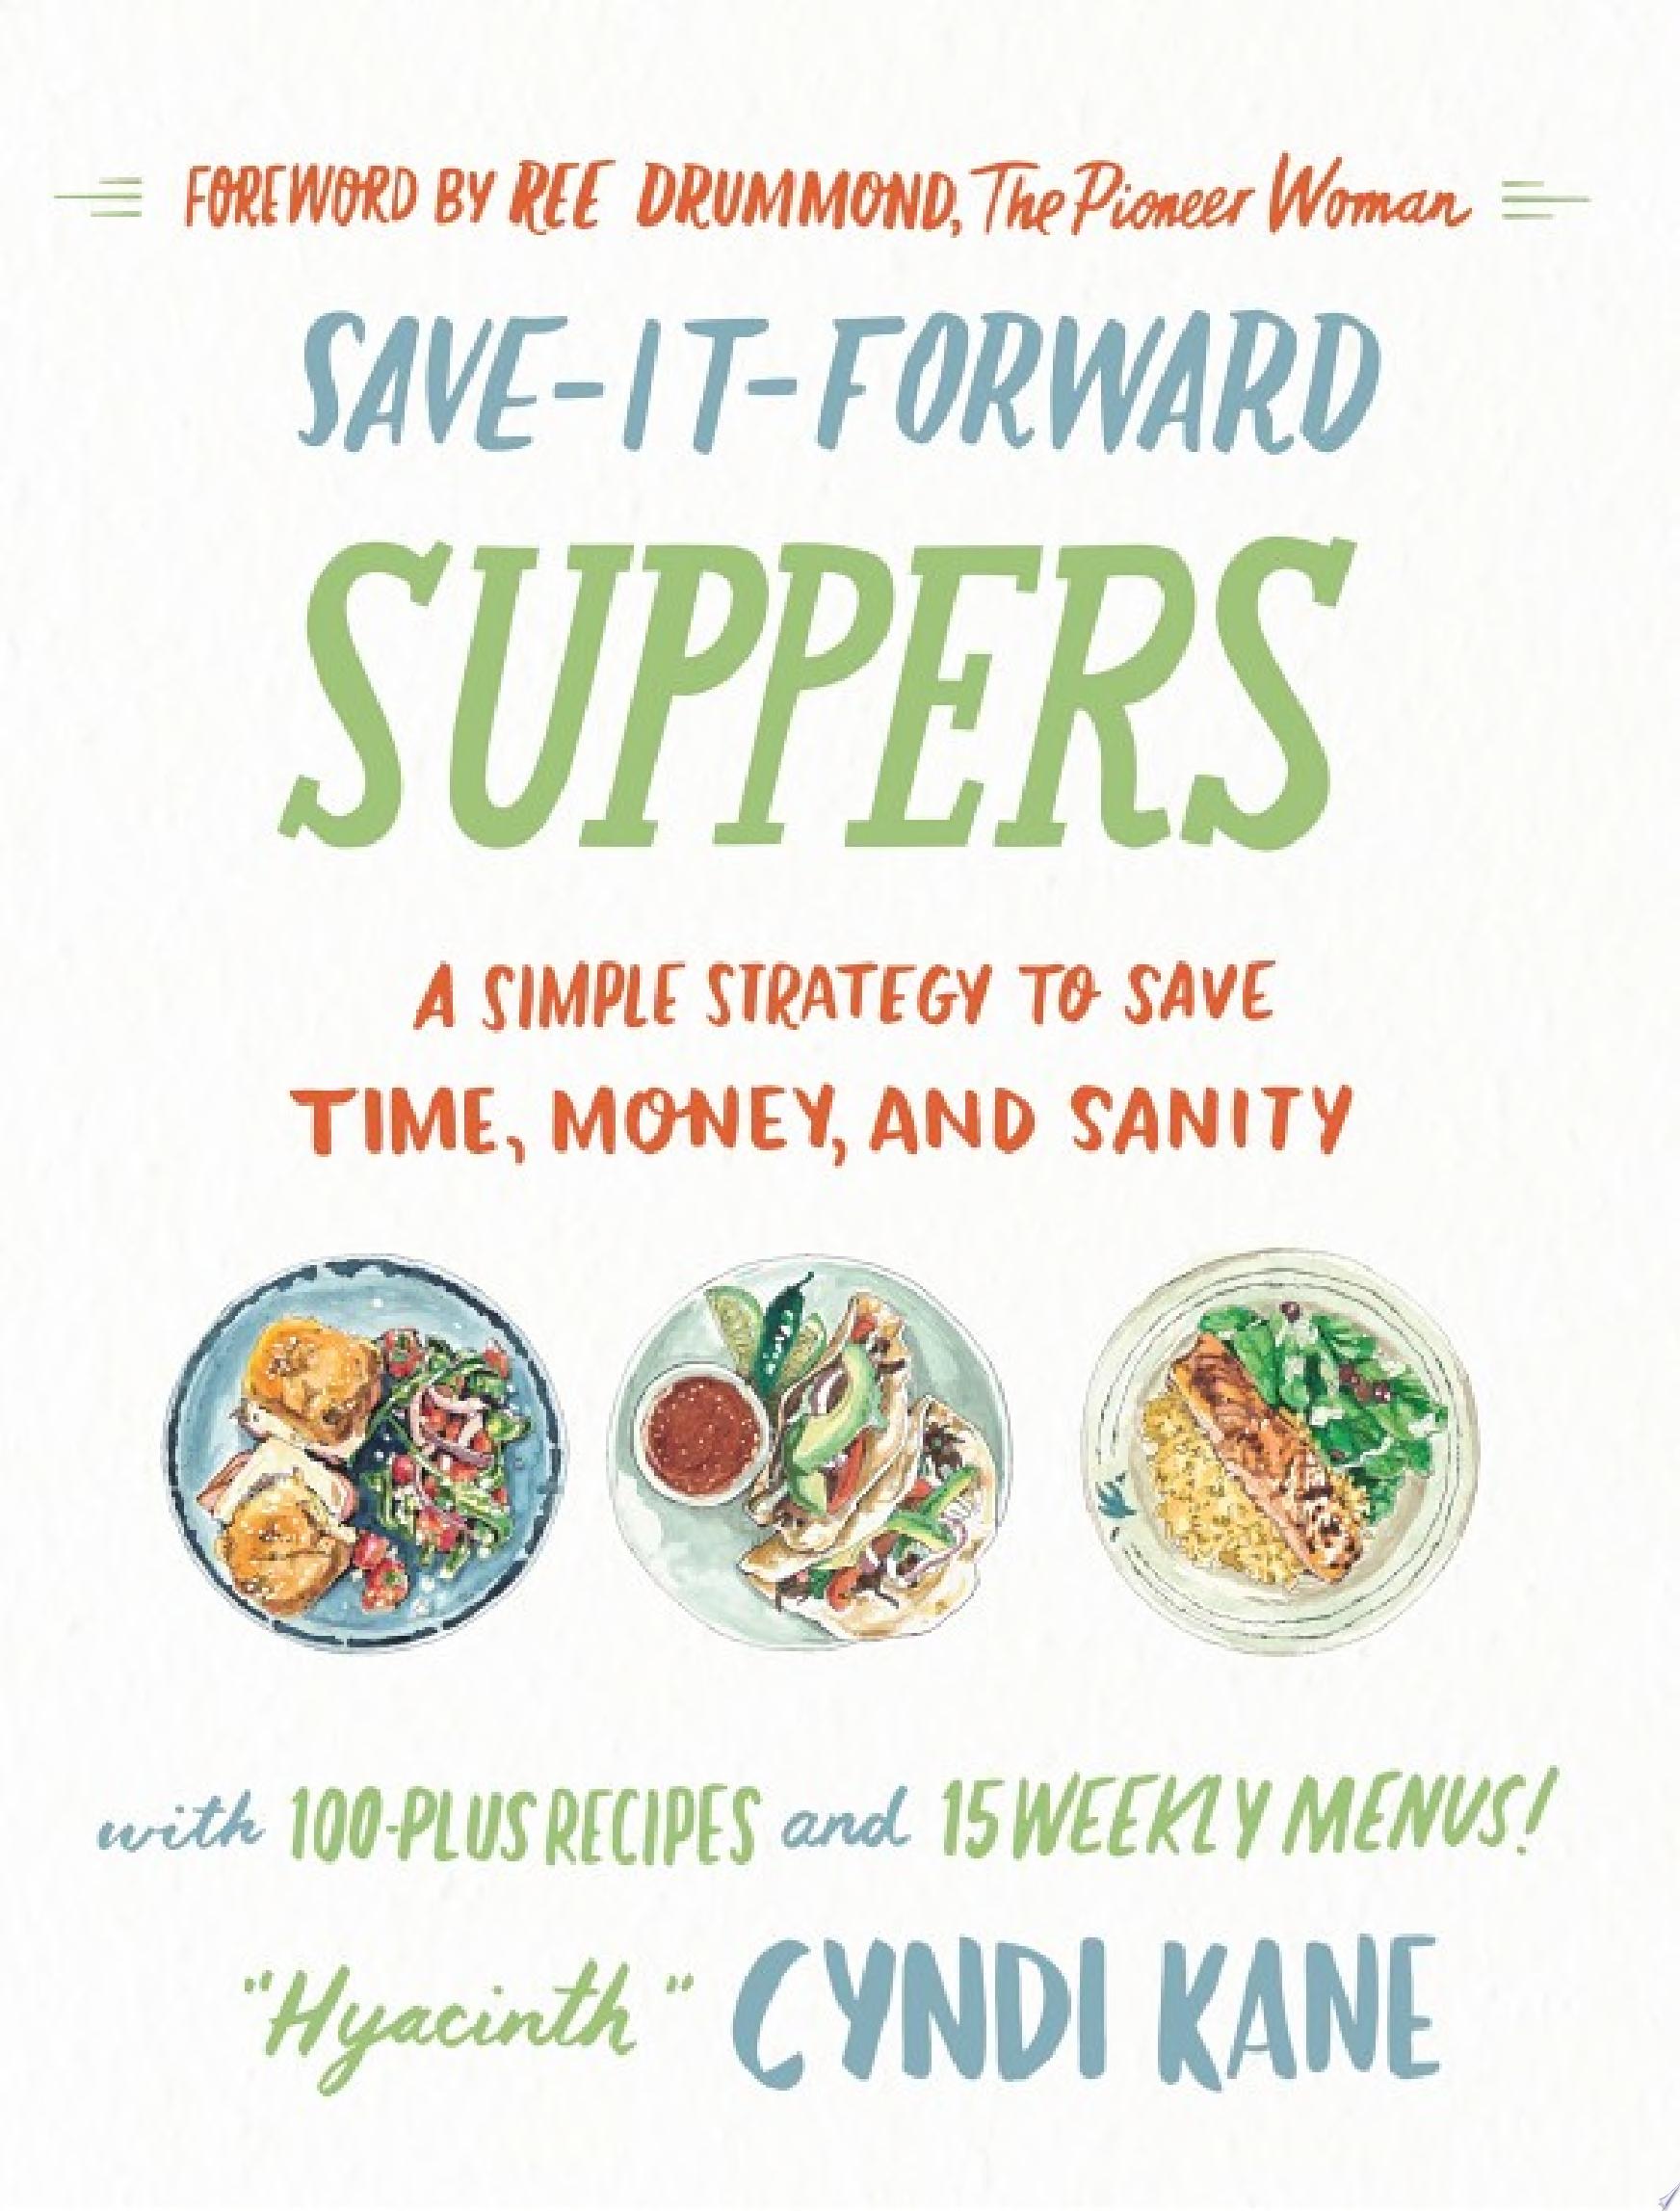 Image for "Save-It-Forward Suppers"